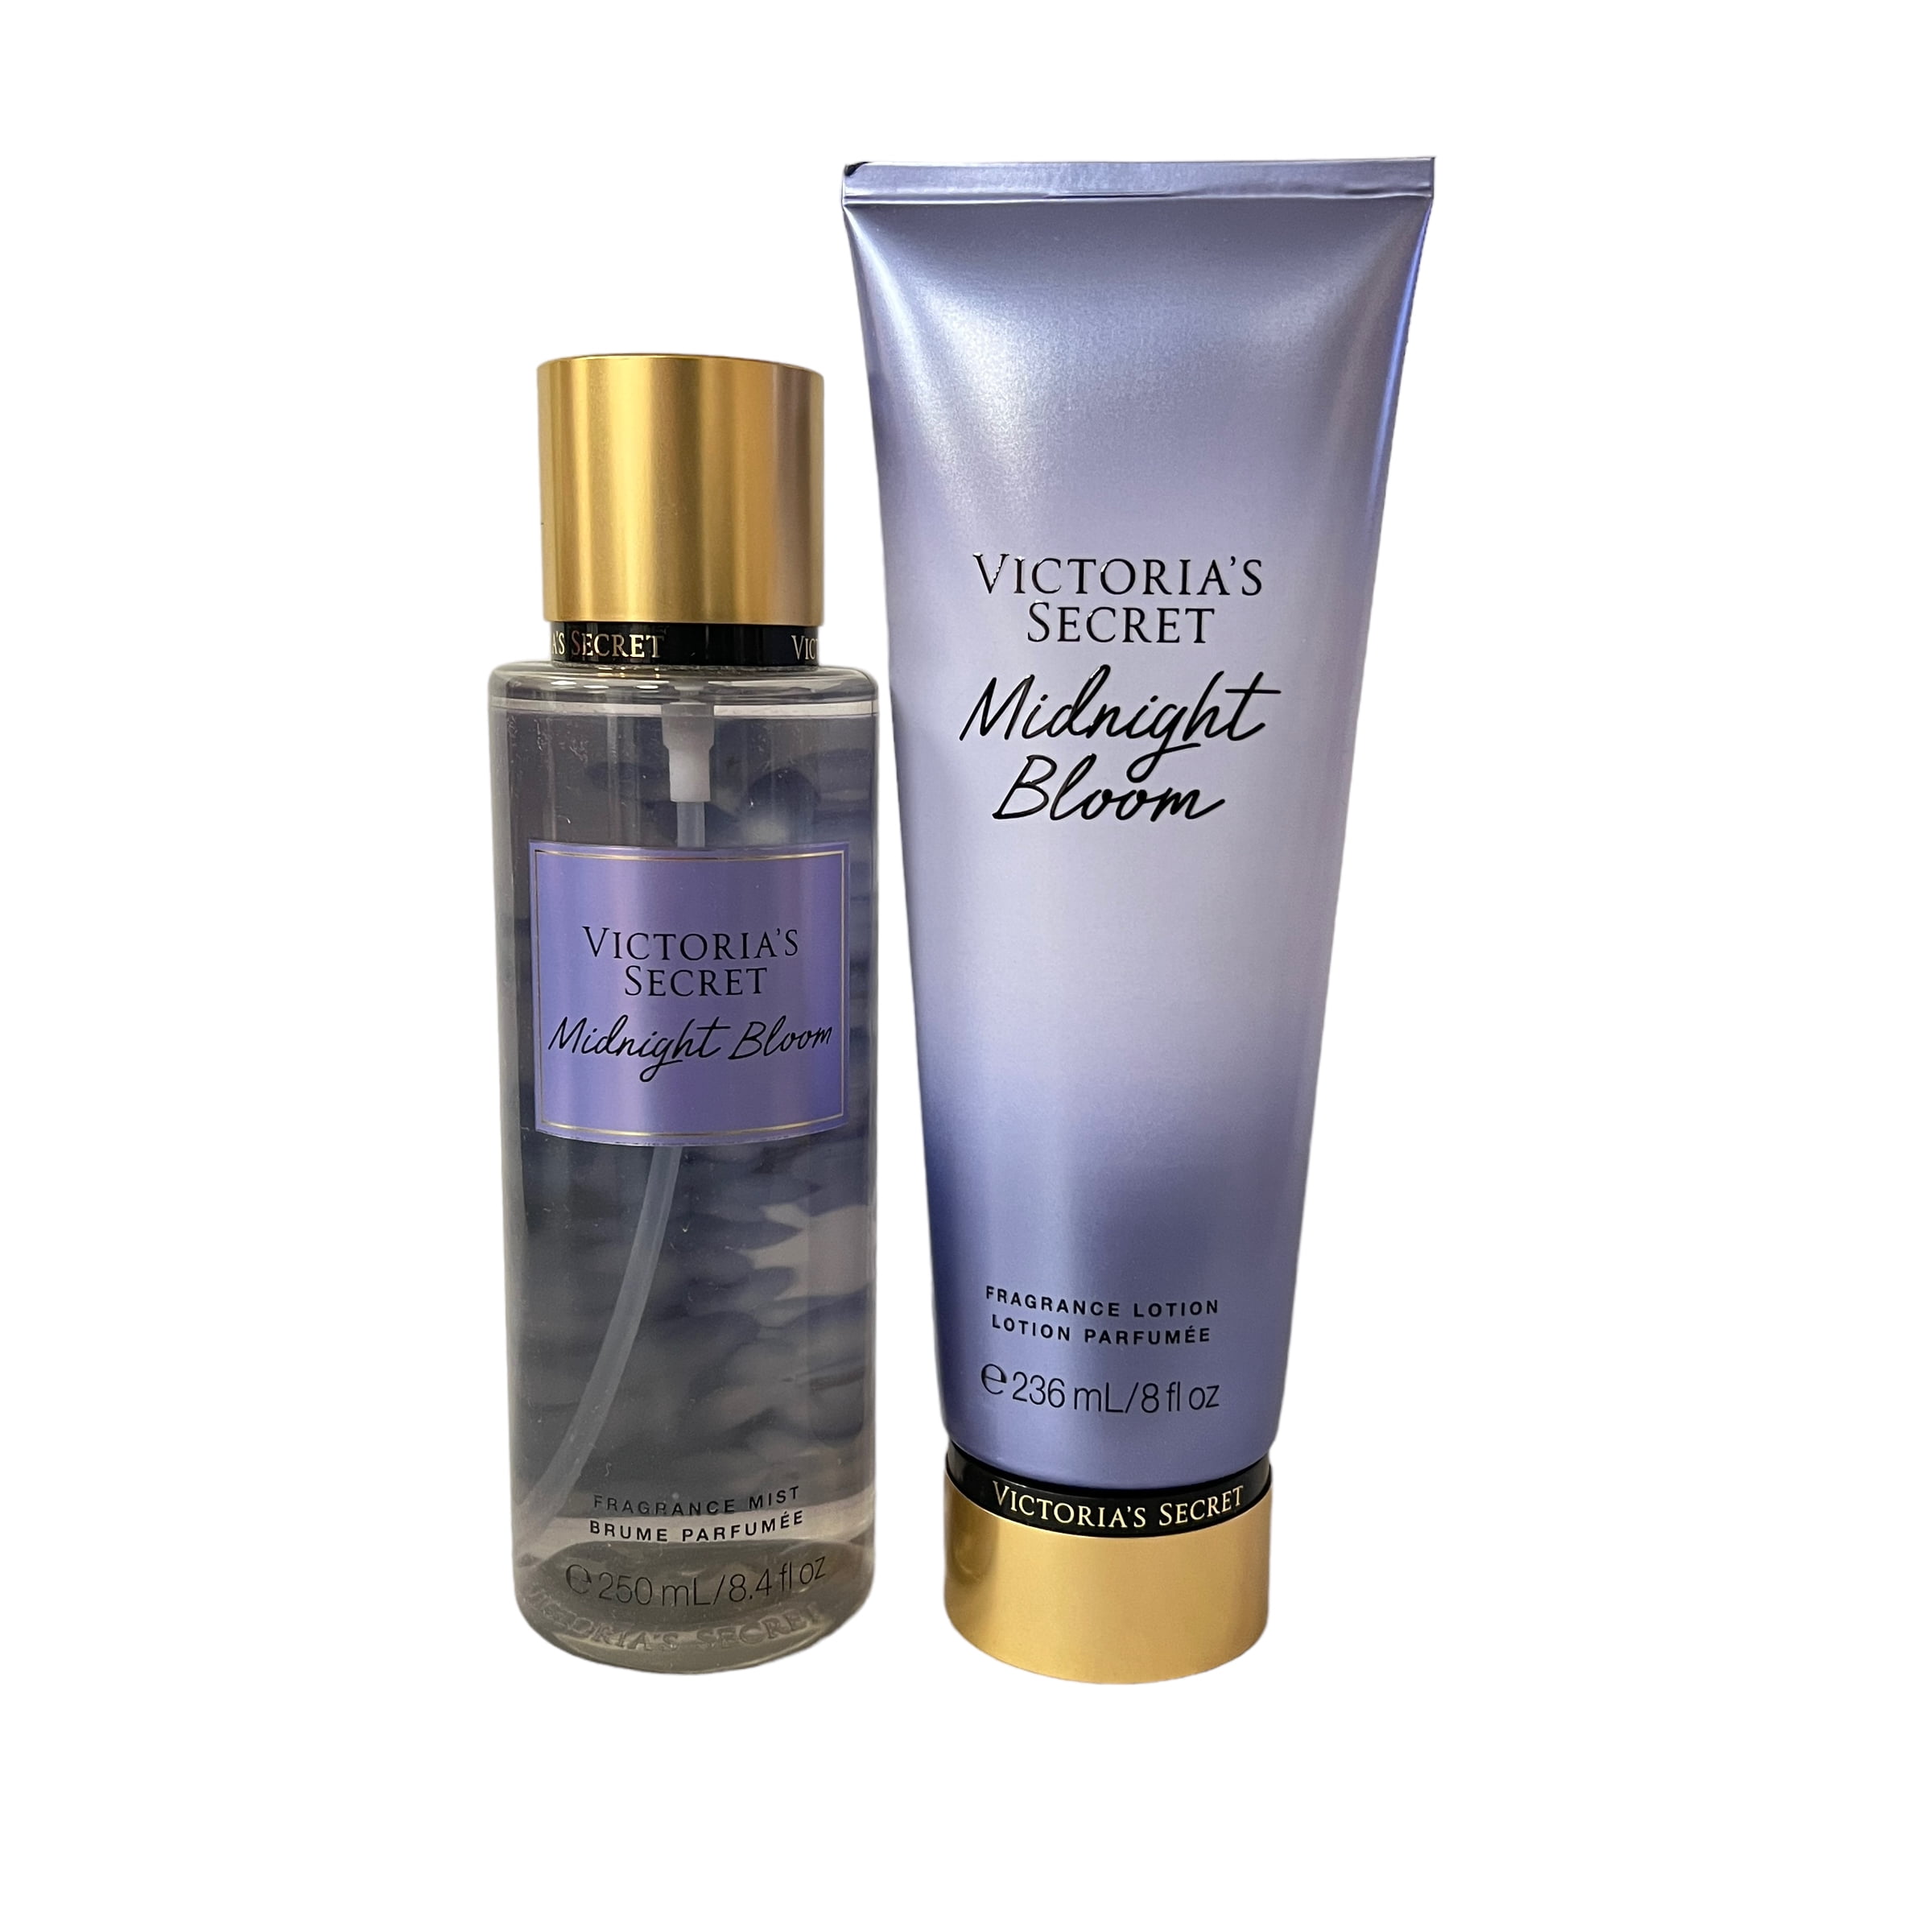 Victoria's Secret Midnight Bloom Fragrance Mist and Body Lotion